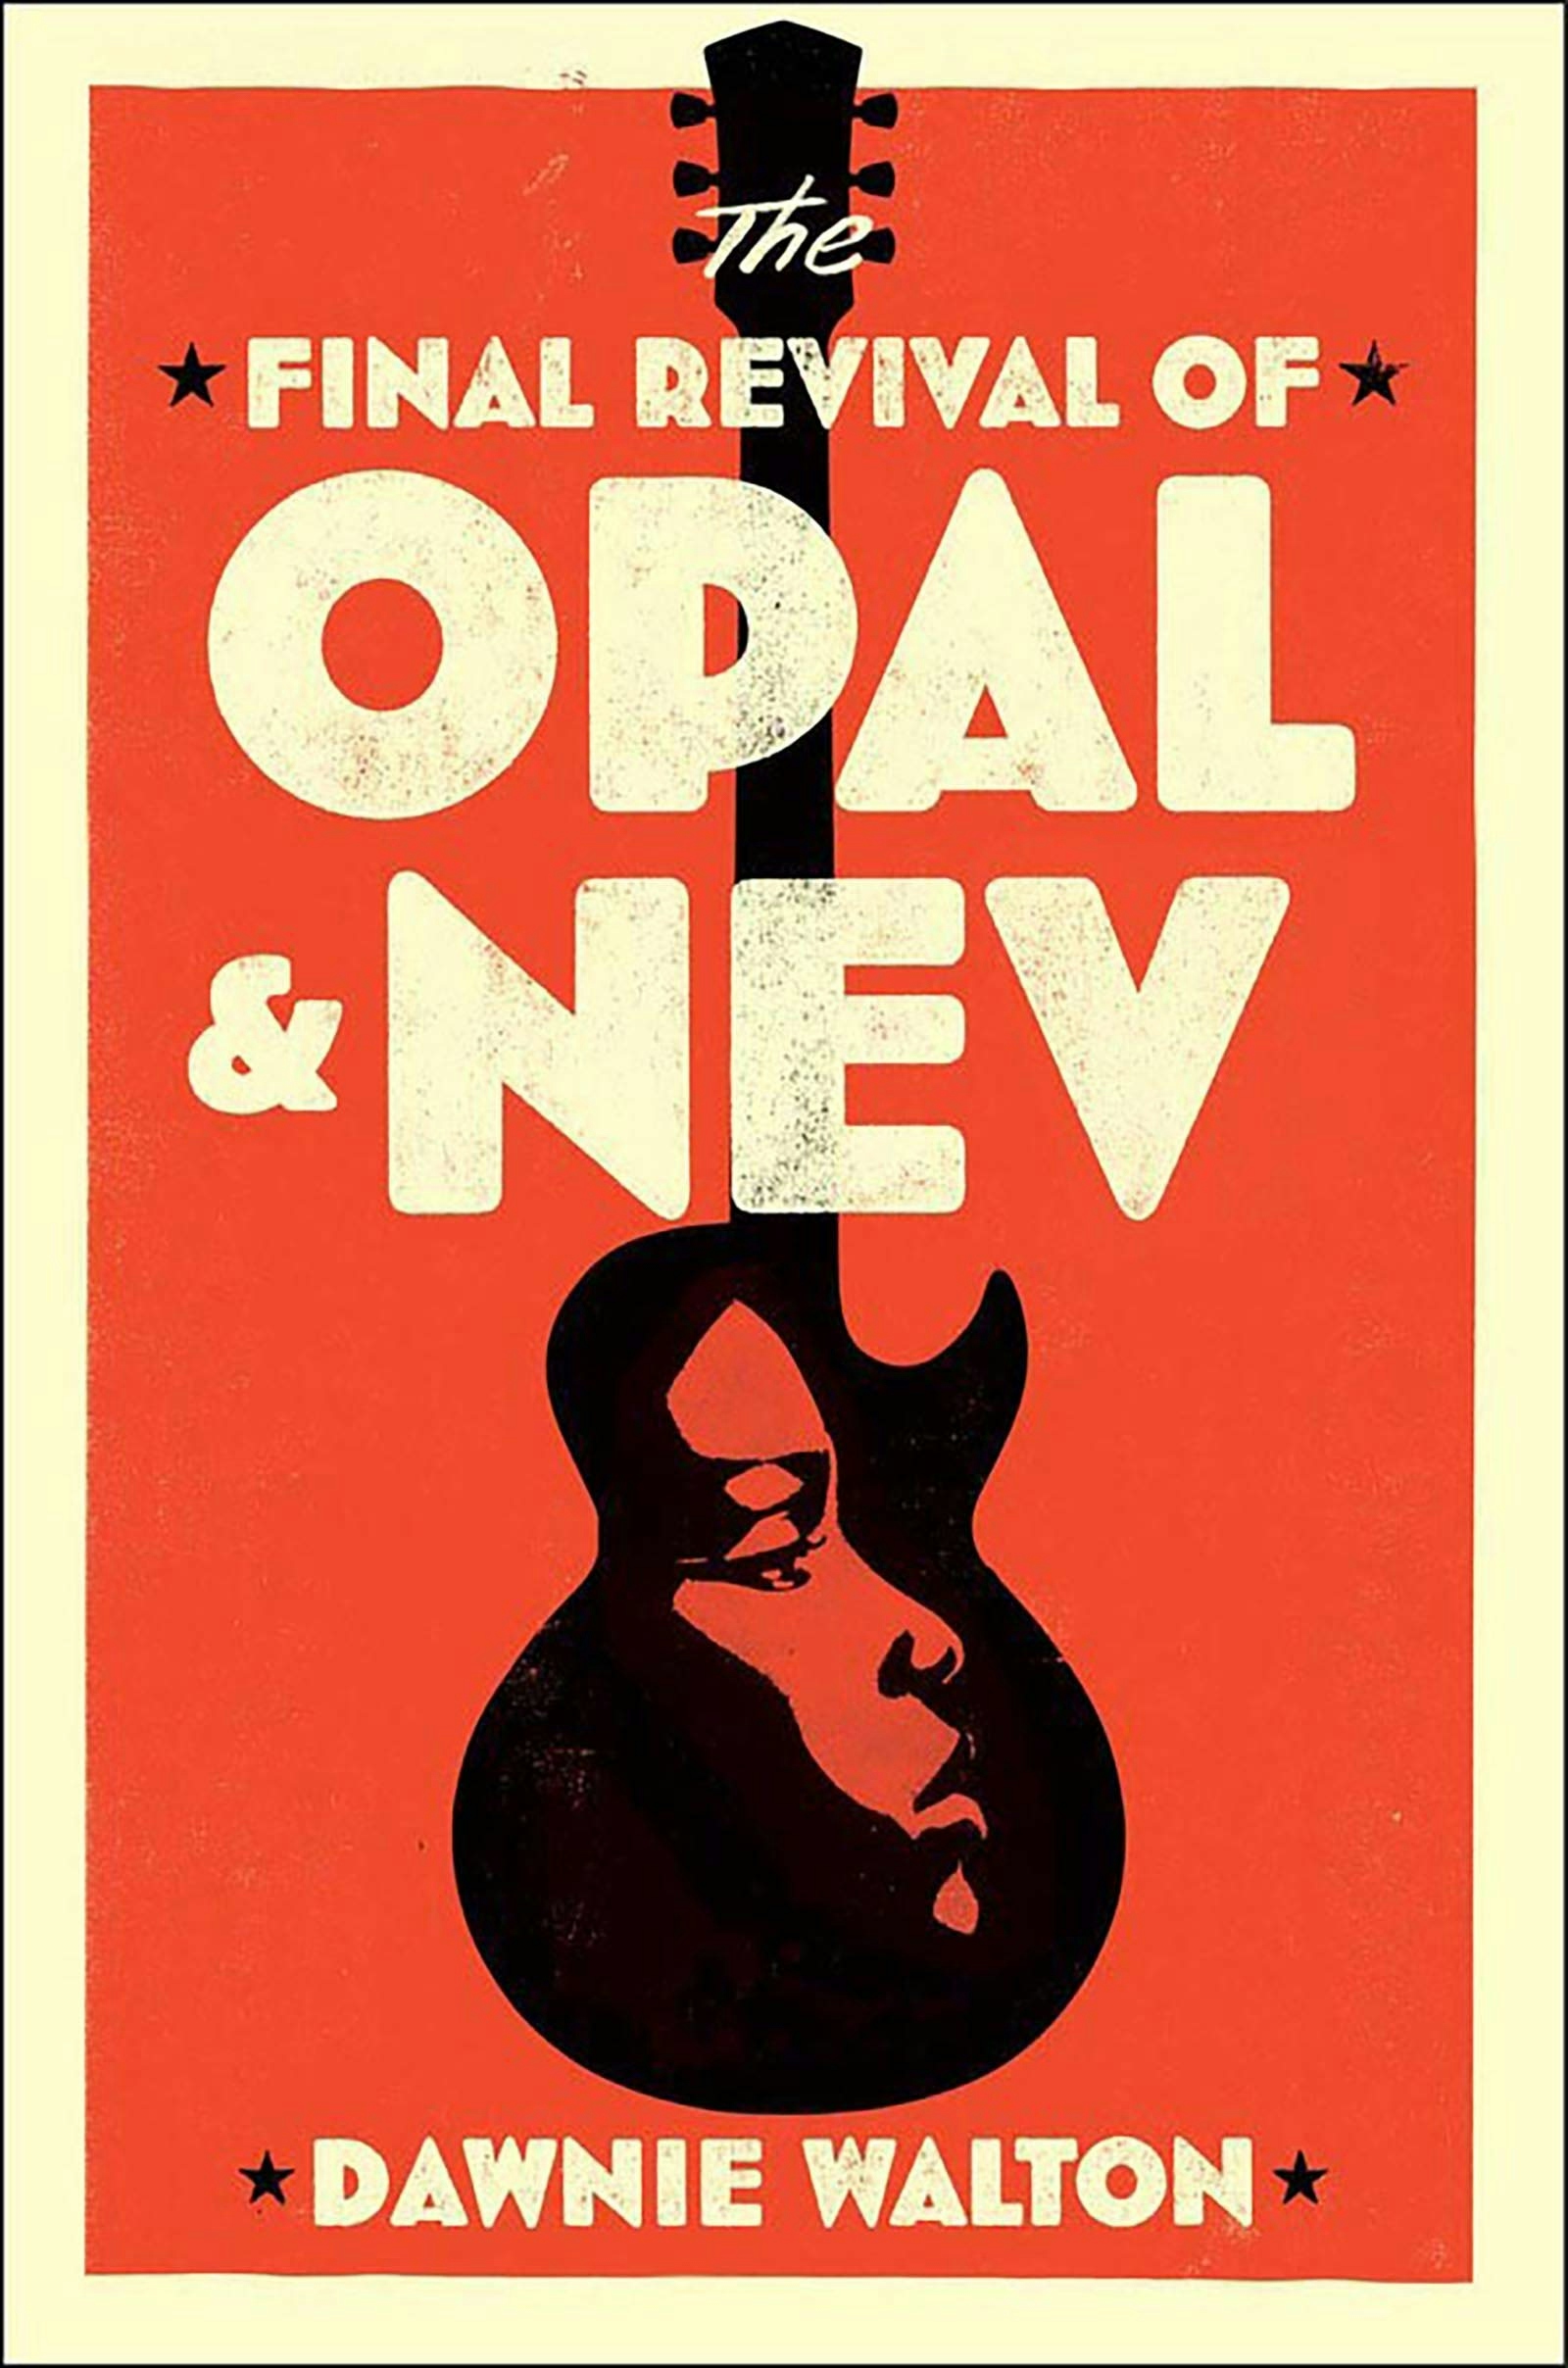 Album artwork for The Final Revival of Opal and Nev by Dawnie Walton